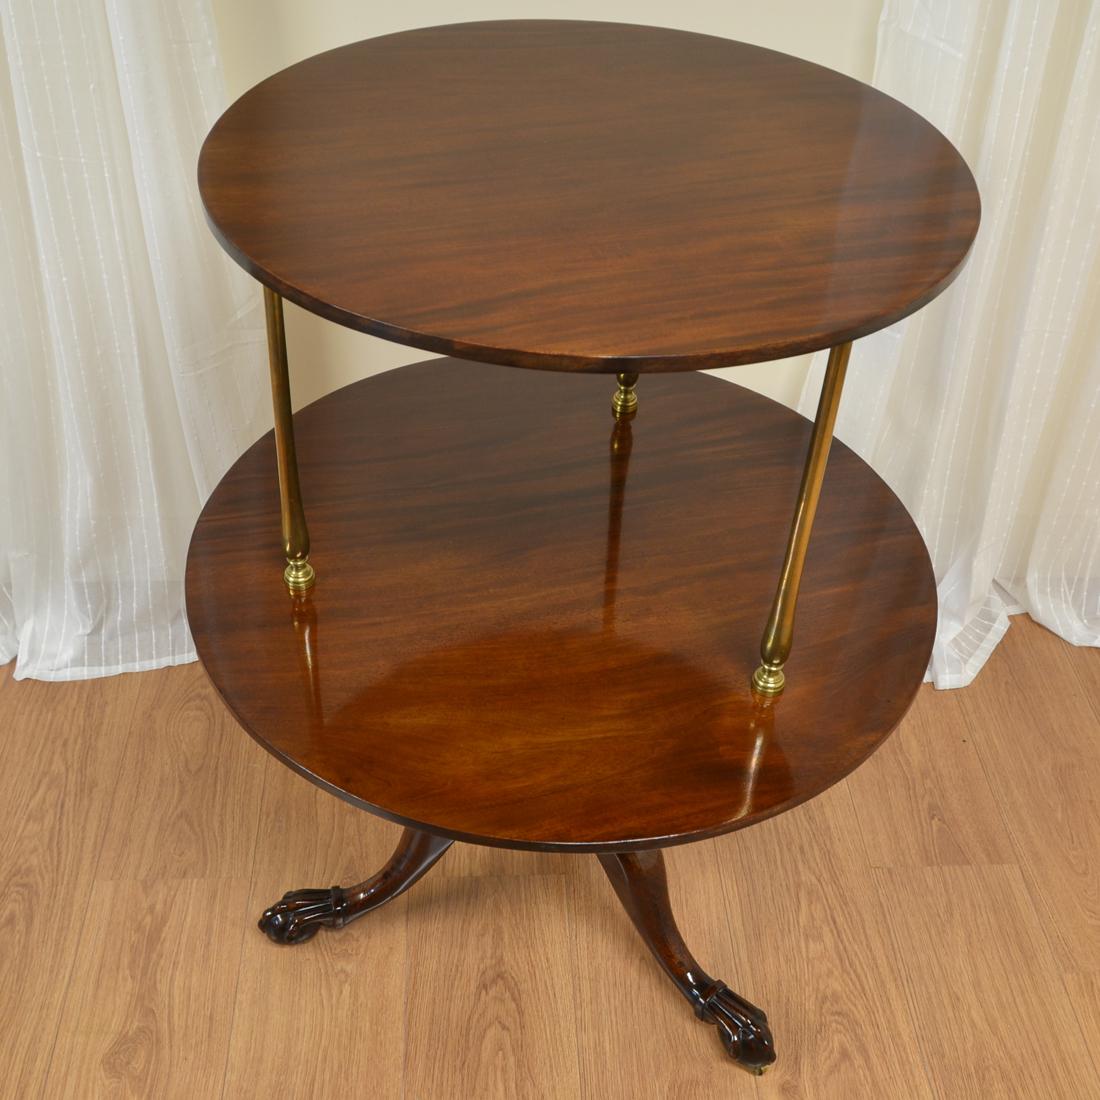 18th Century and Earlier 18th Century Georgian Mahogany Antique Two Tier Circular Occasional Lamp Table For Sale